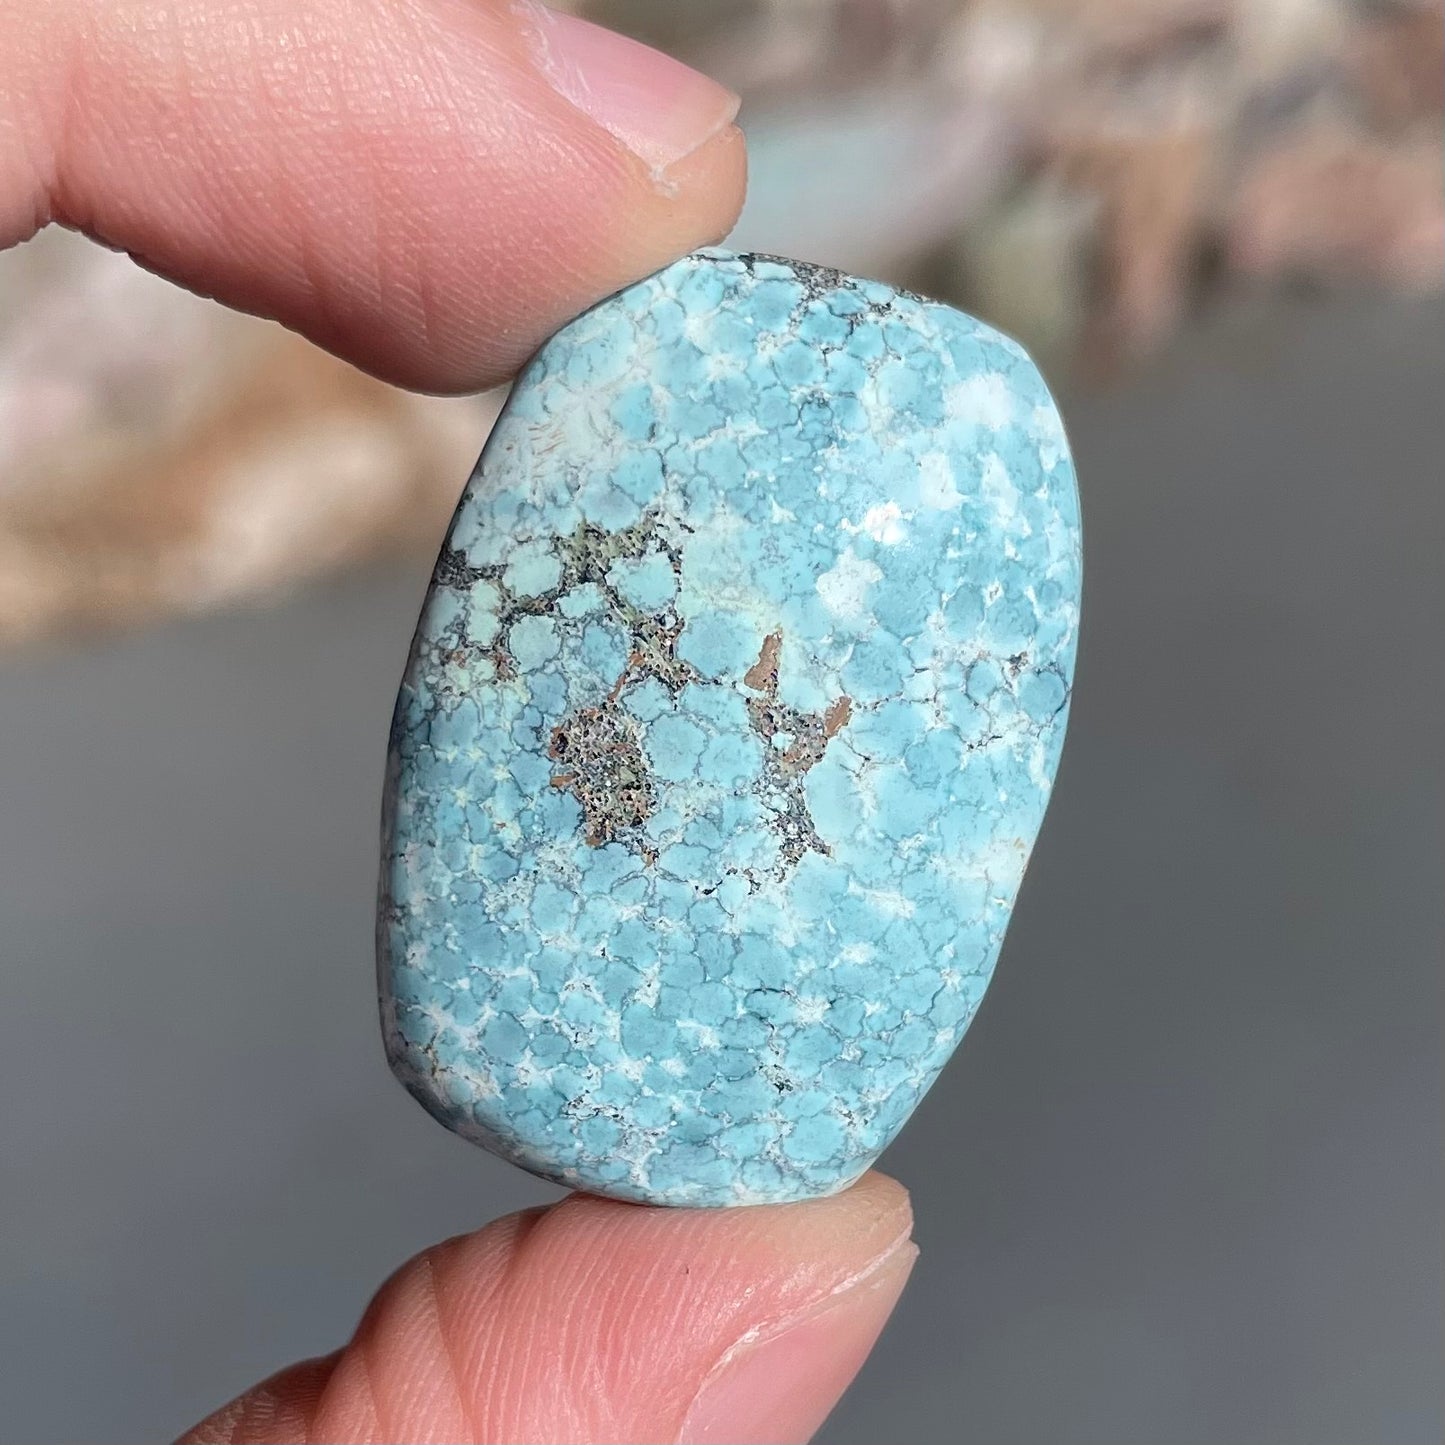 A loose, barrel cabochon cut turquoise stone from Baja California.  The piece is light blue with a gray matrix.